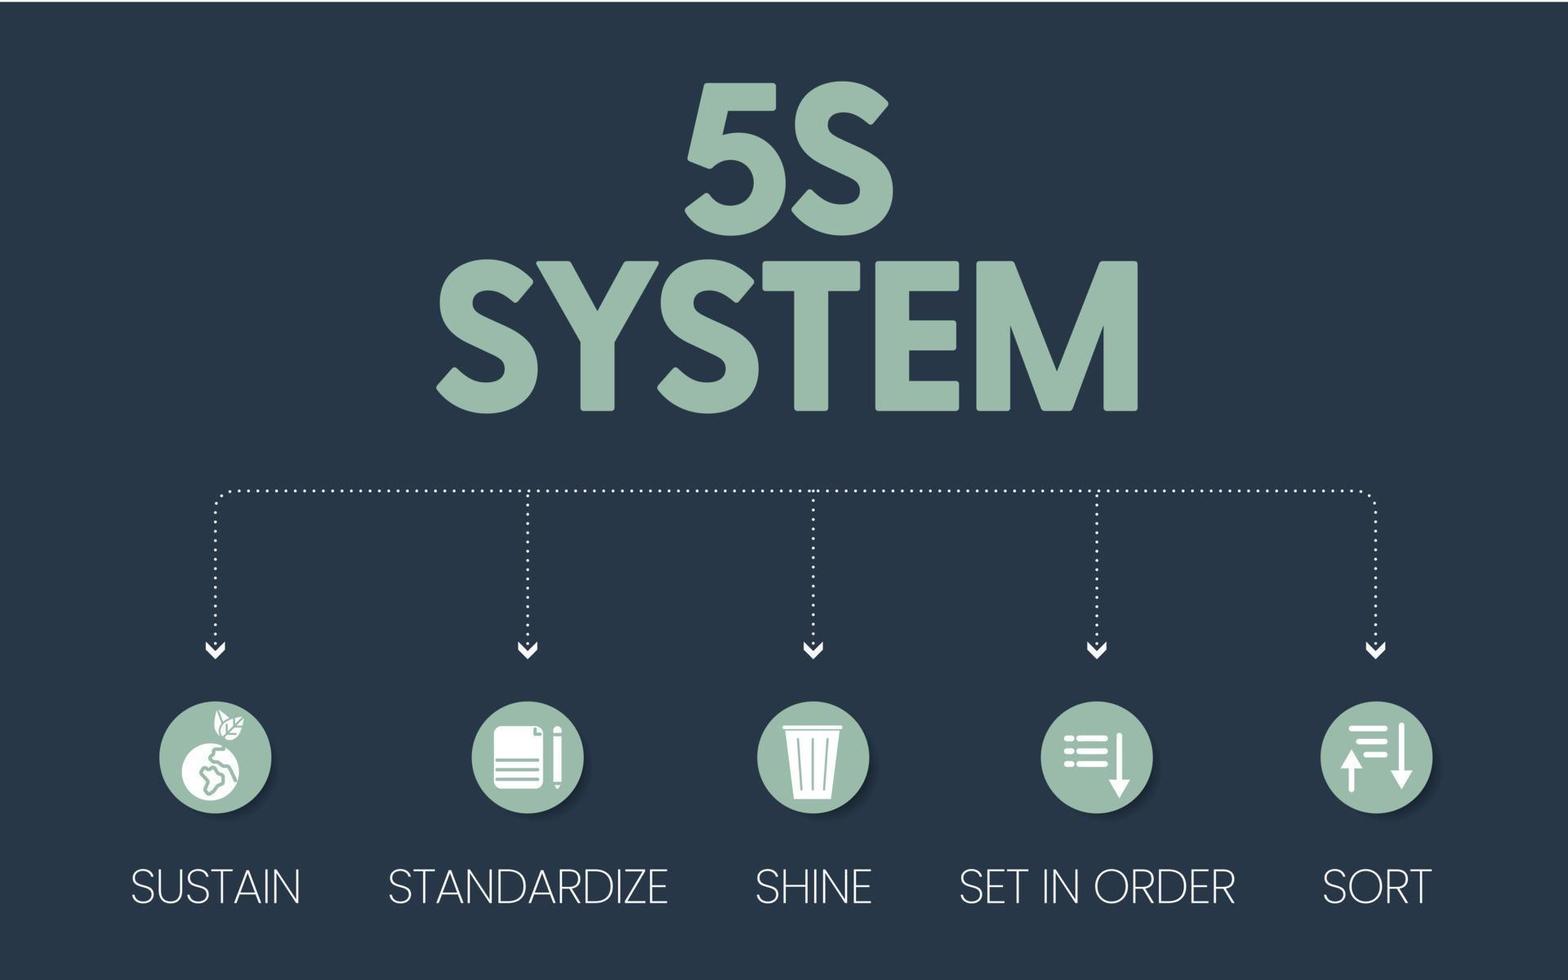 The 5S system is organizing spaces industry performed effectively, and safely in five steps Sort, Set in Order, Shine, Standardize, and Sustain with lean process into a banner vector for the company